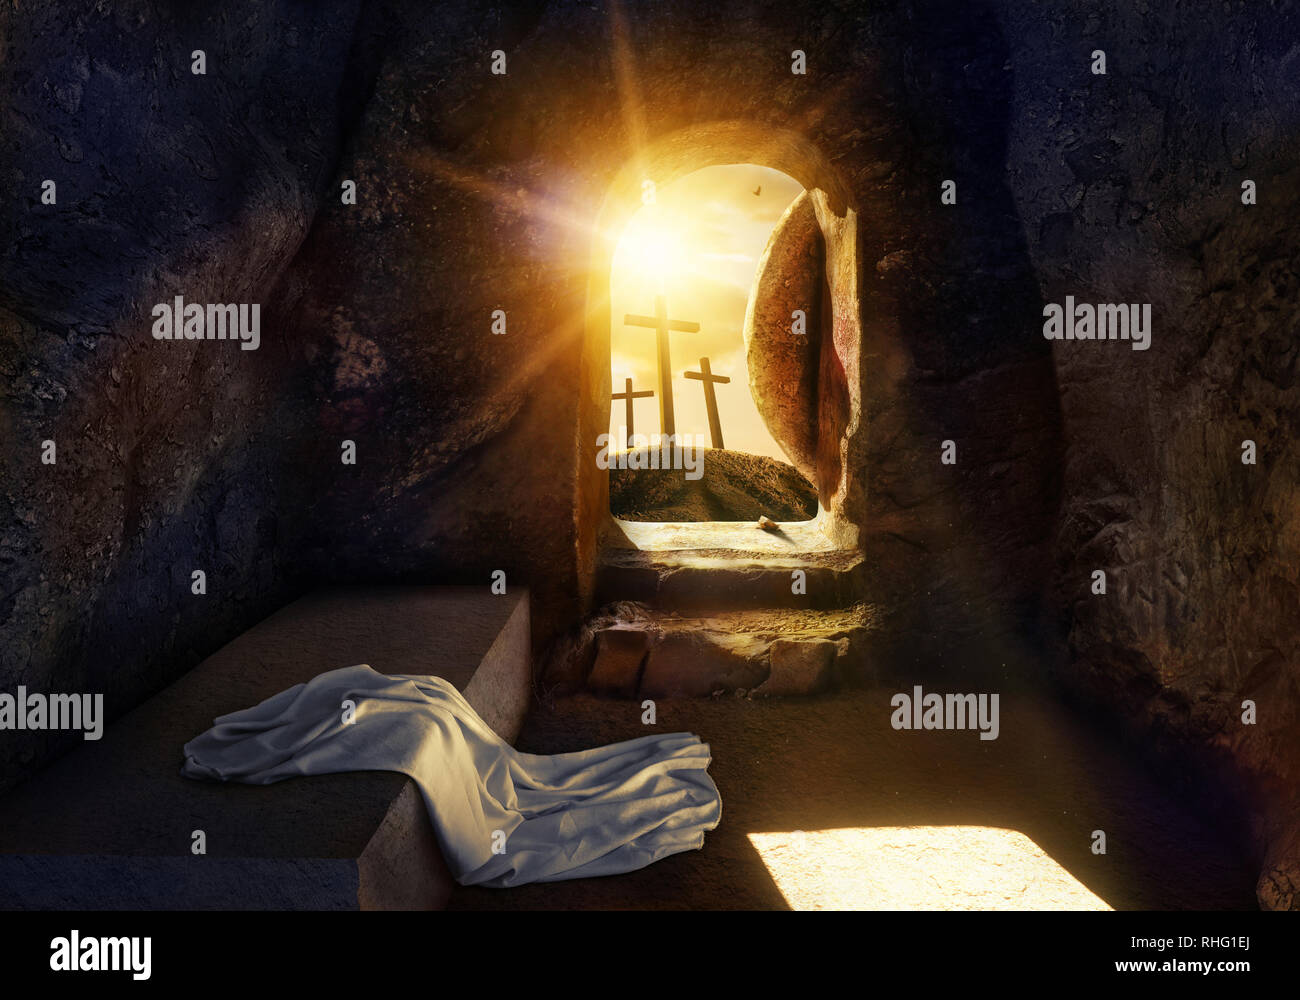 He is Risen. Empty Tomb With Shroud. Crucifixion at Sunrise. The illustration contains 3d elements. Stock Photo